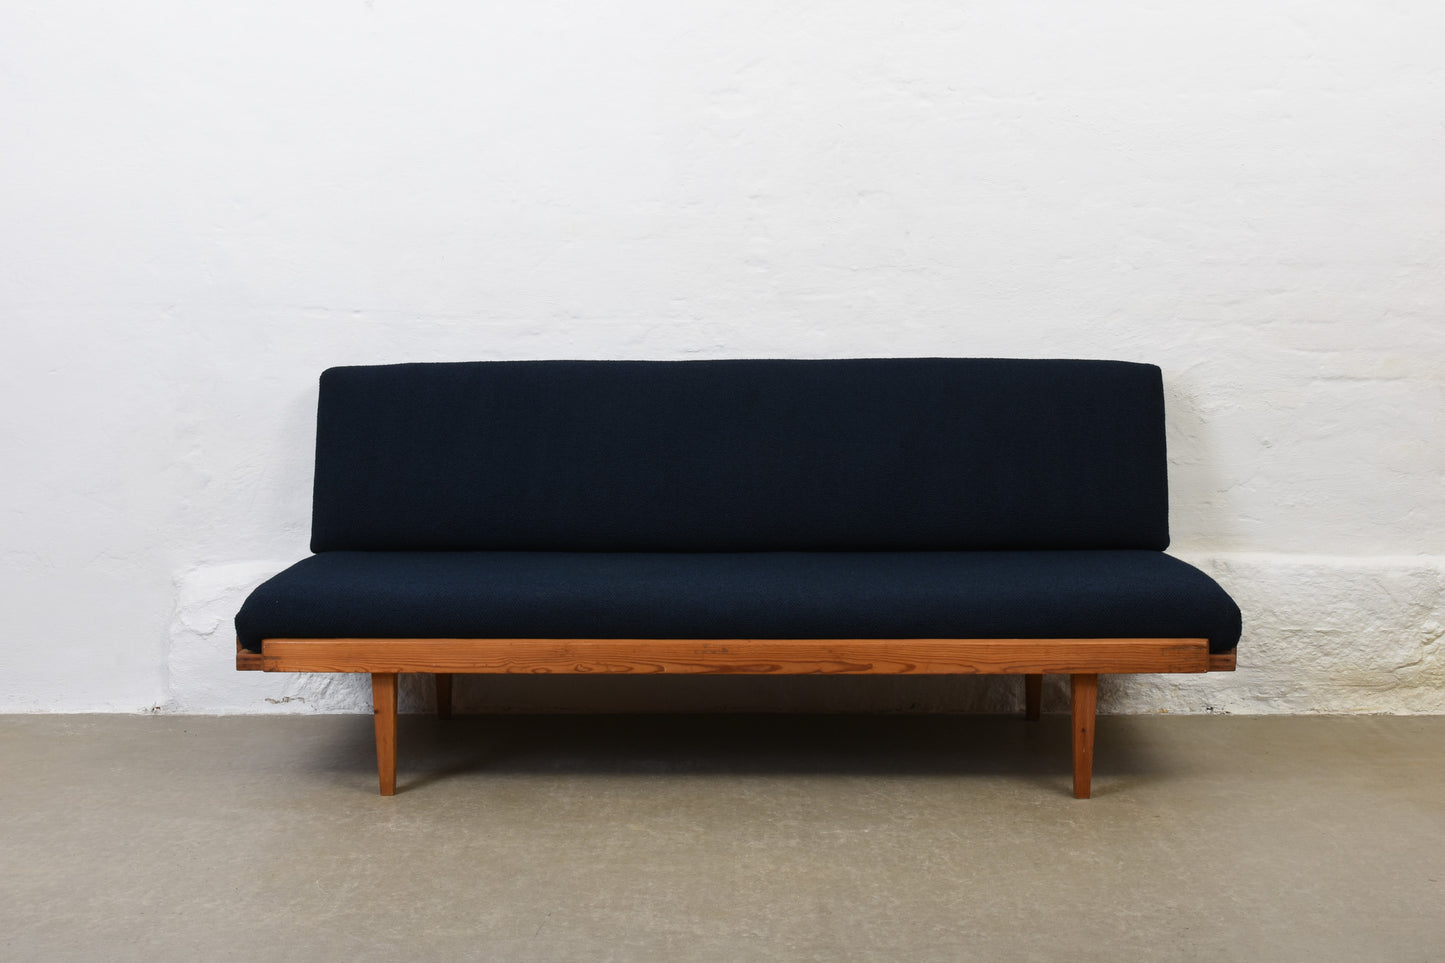 Newly reupholstered: 1960s day bed by Horsnæs Møbelfabrik